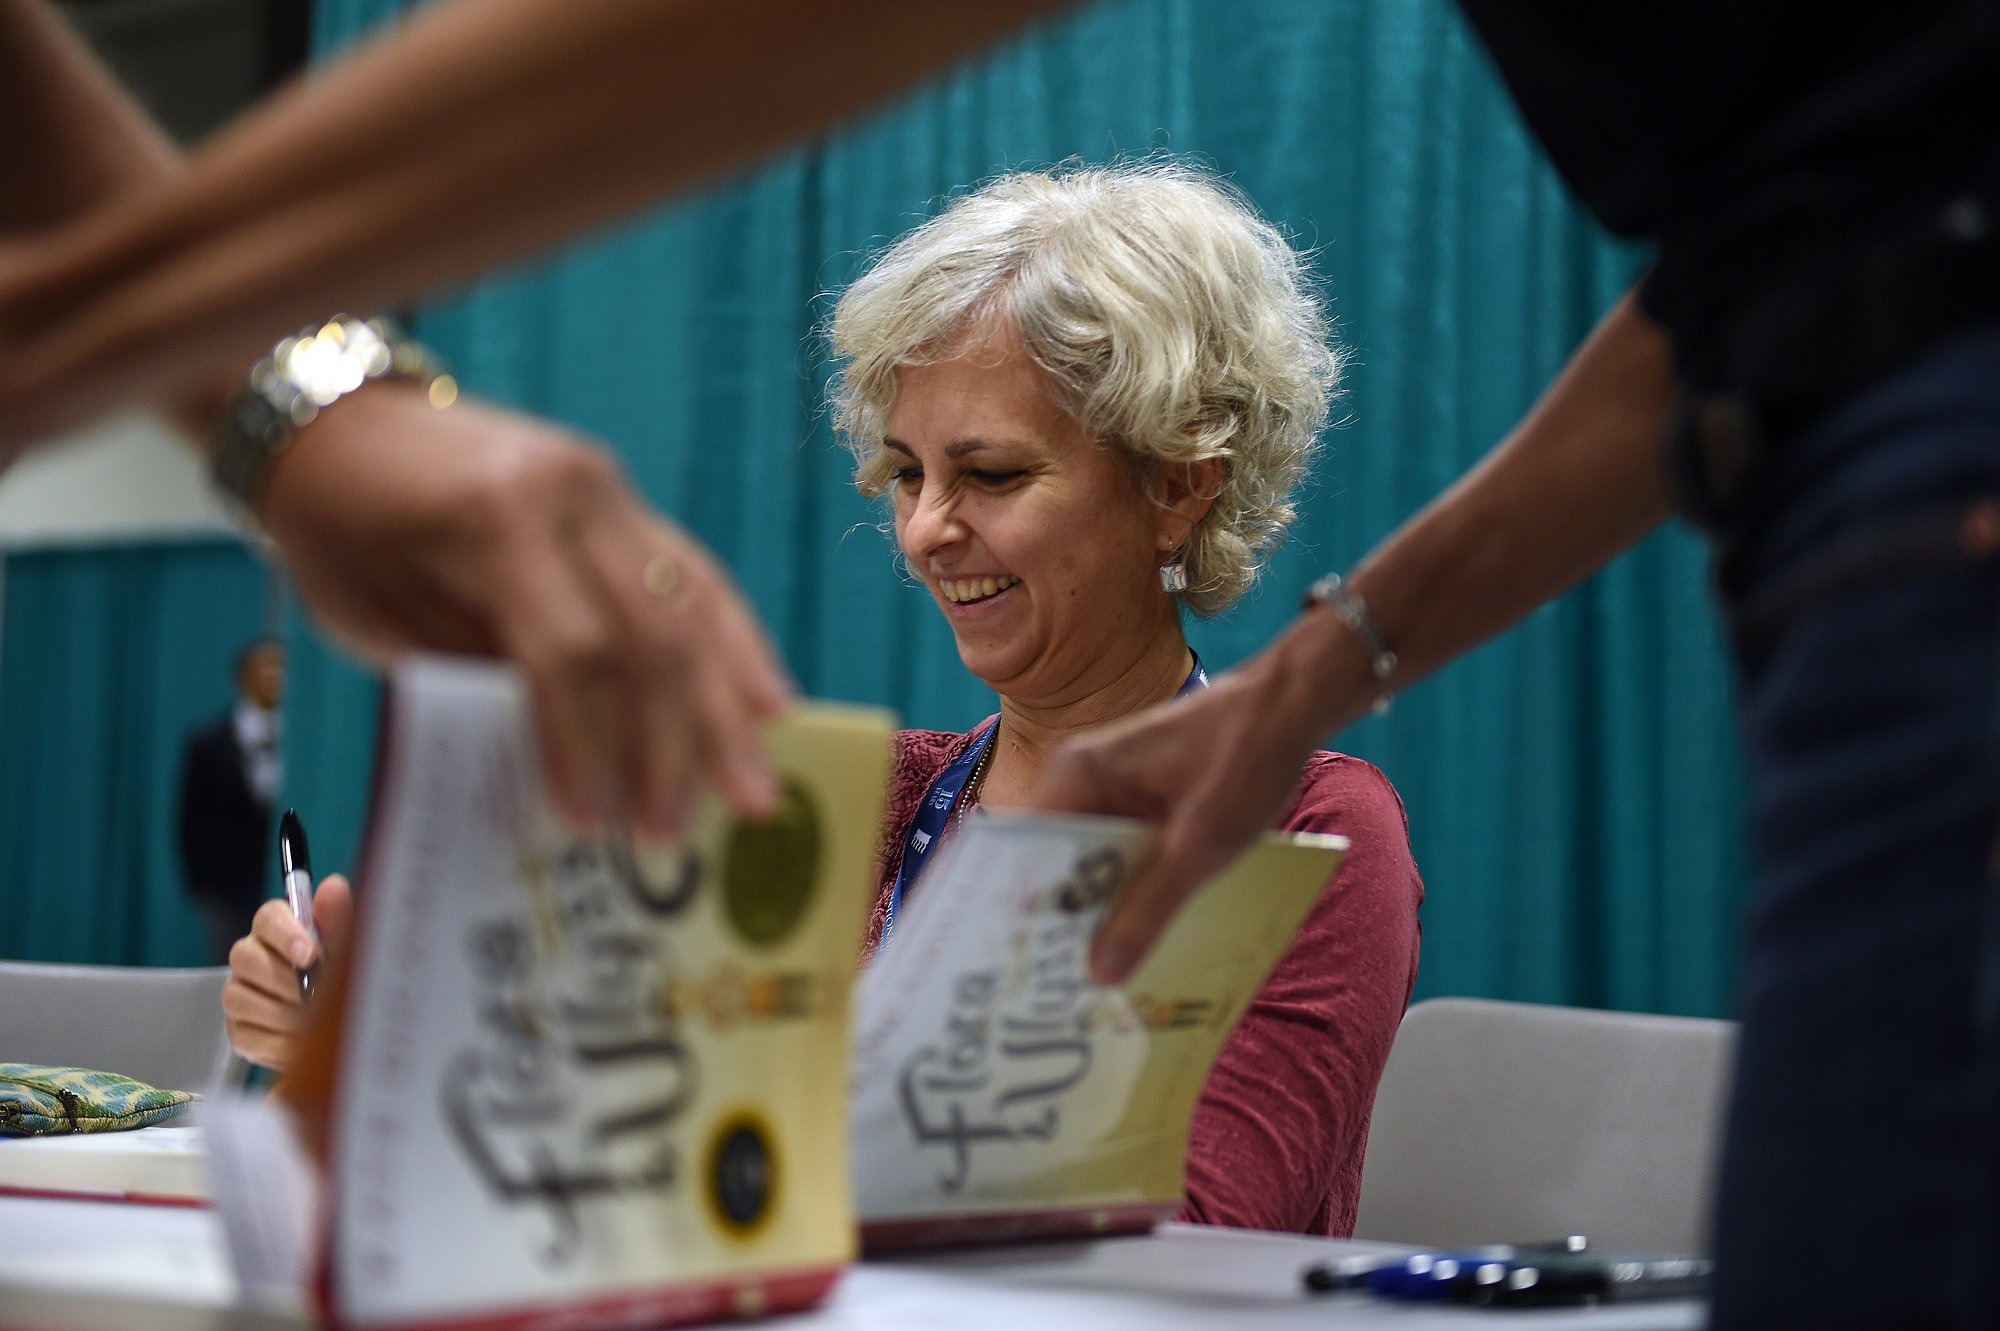 Kate DiCamillo signing books